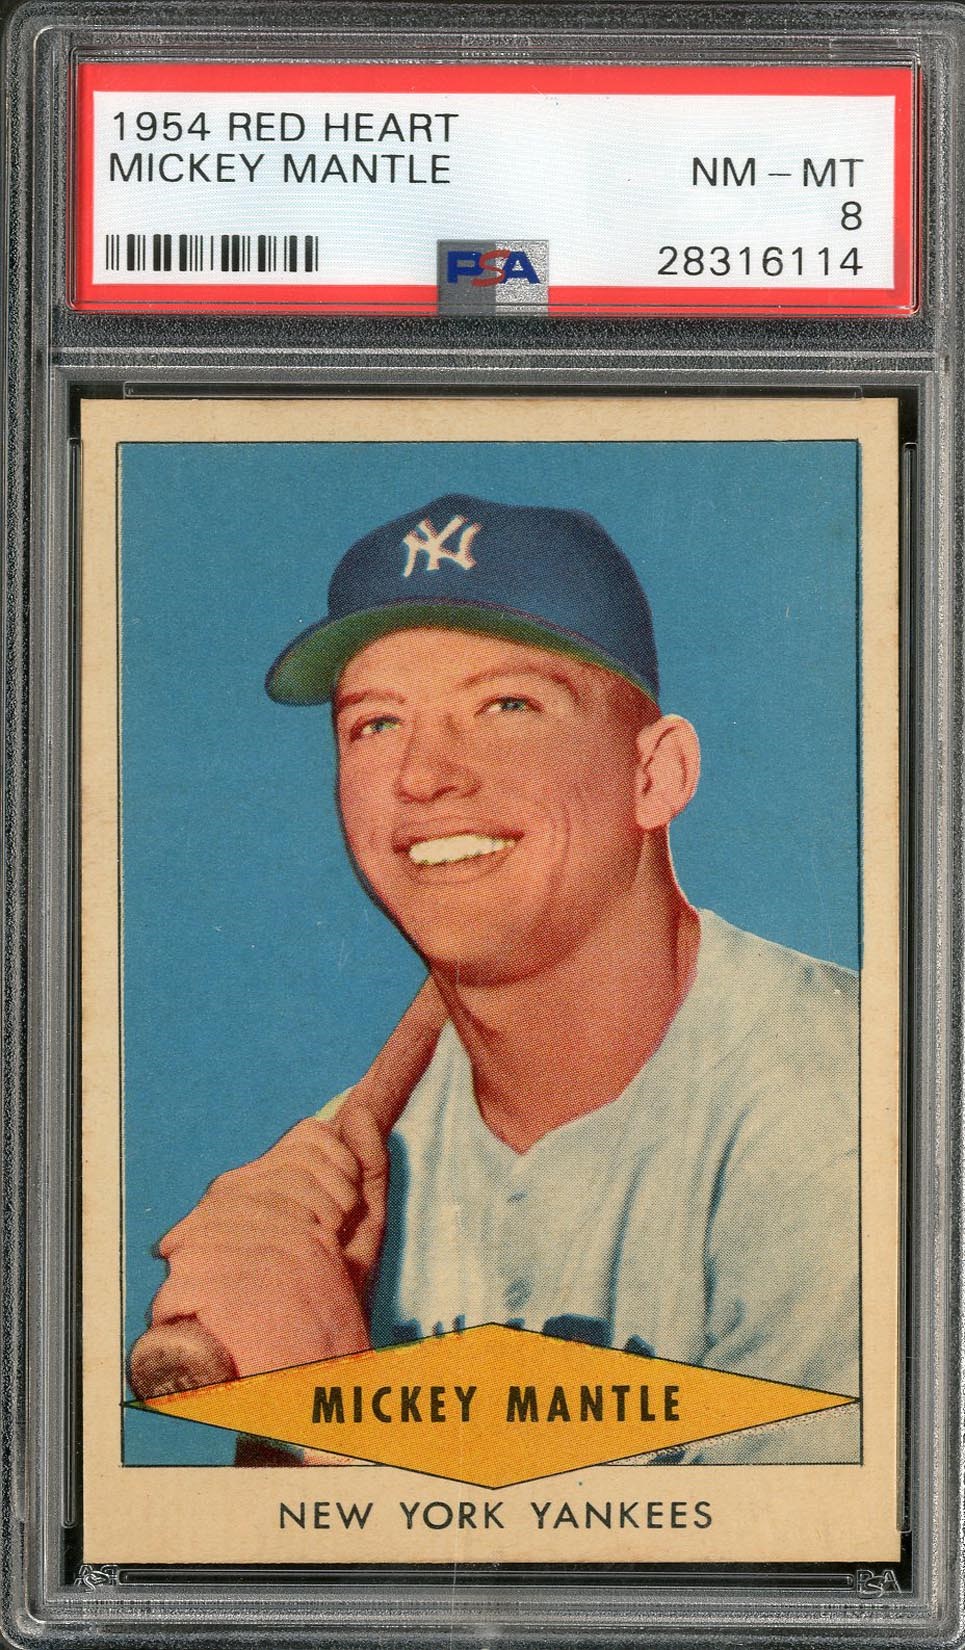 Baseball and Trading Cards - 1954 Red Heart Mickey Mantle - PSA NM-MT 8